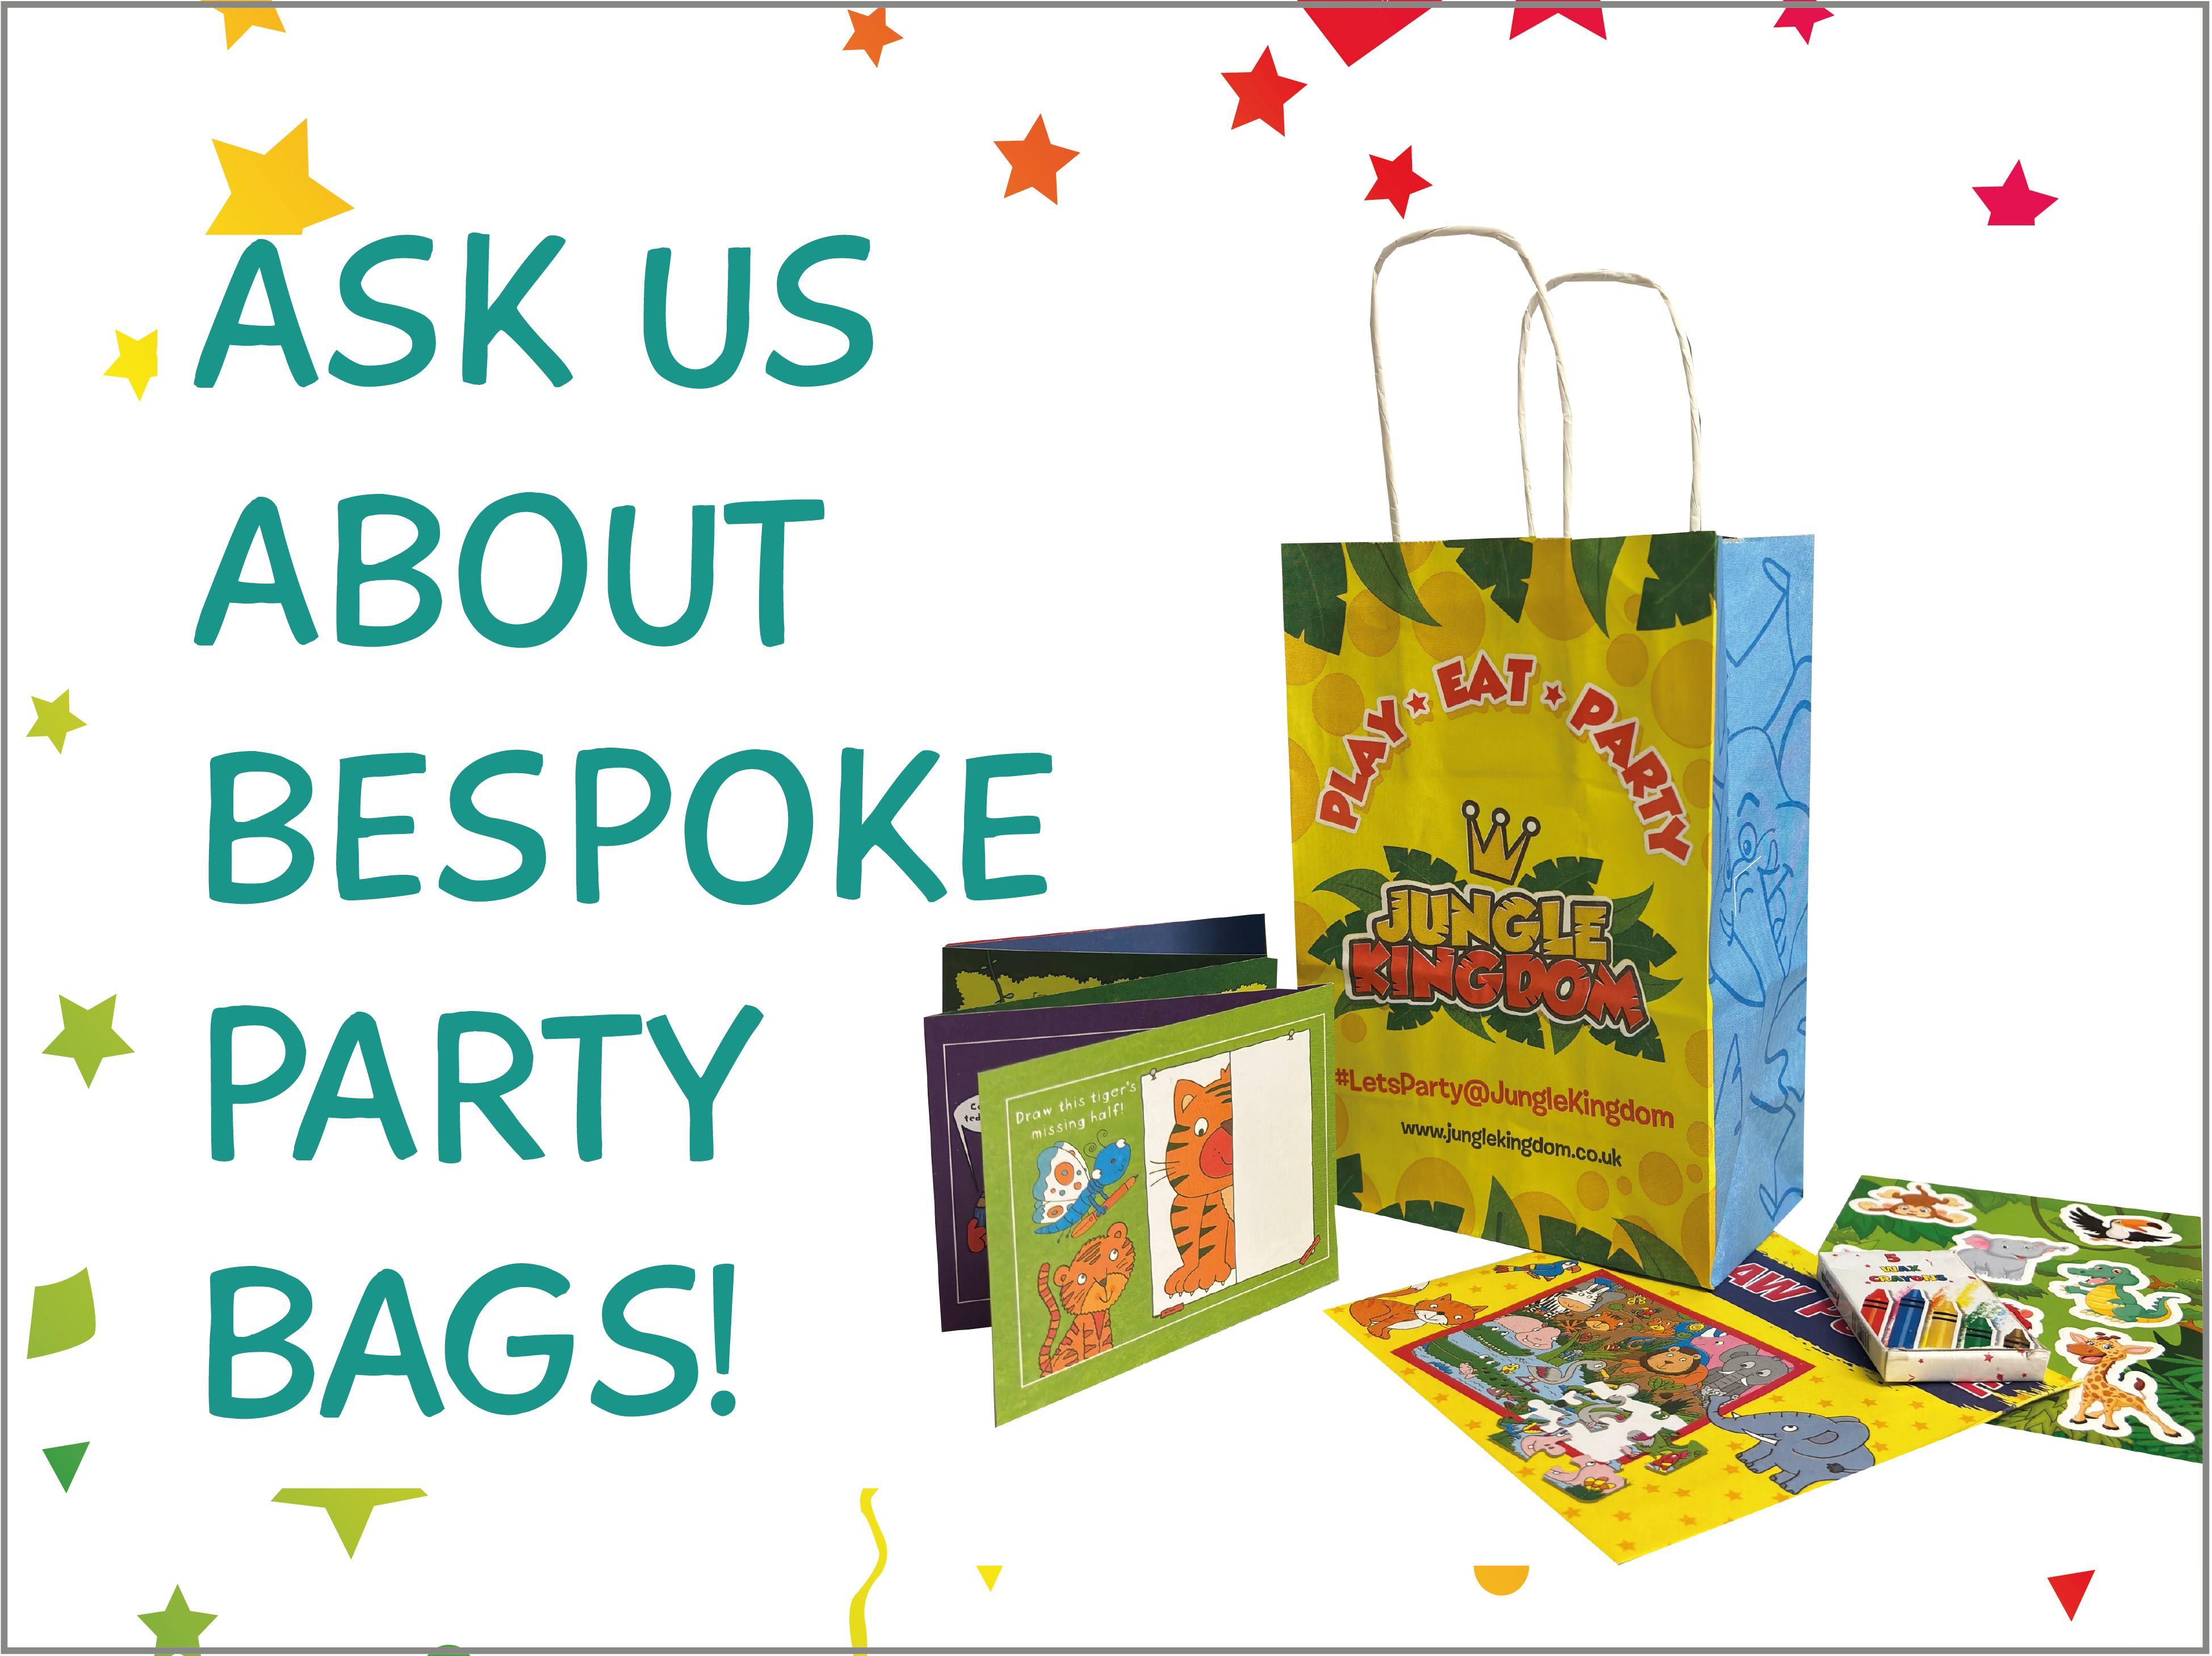 BESPOKE PARTY BAGS